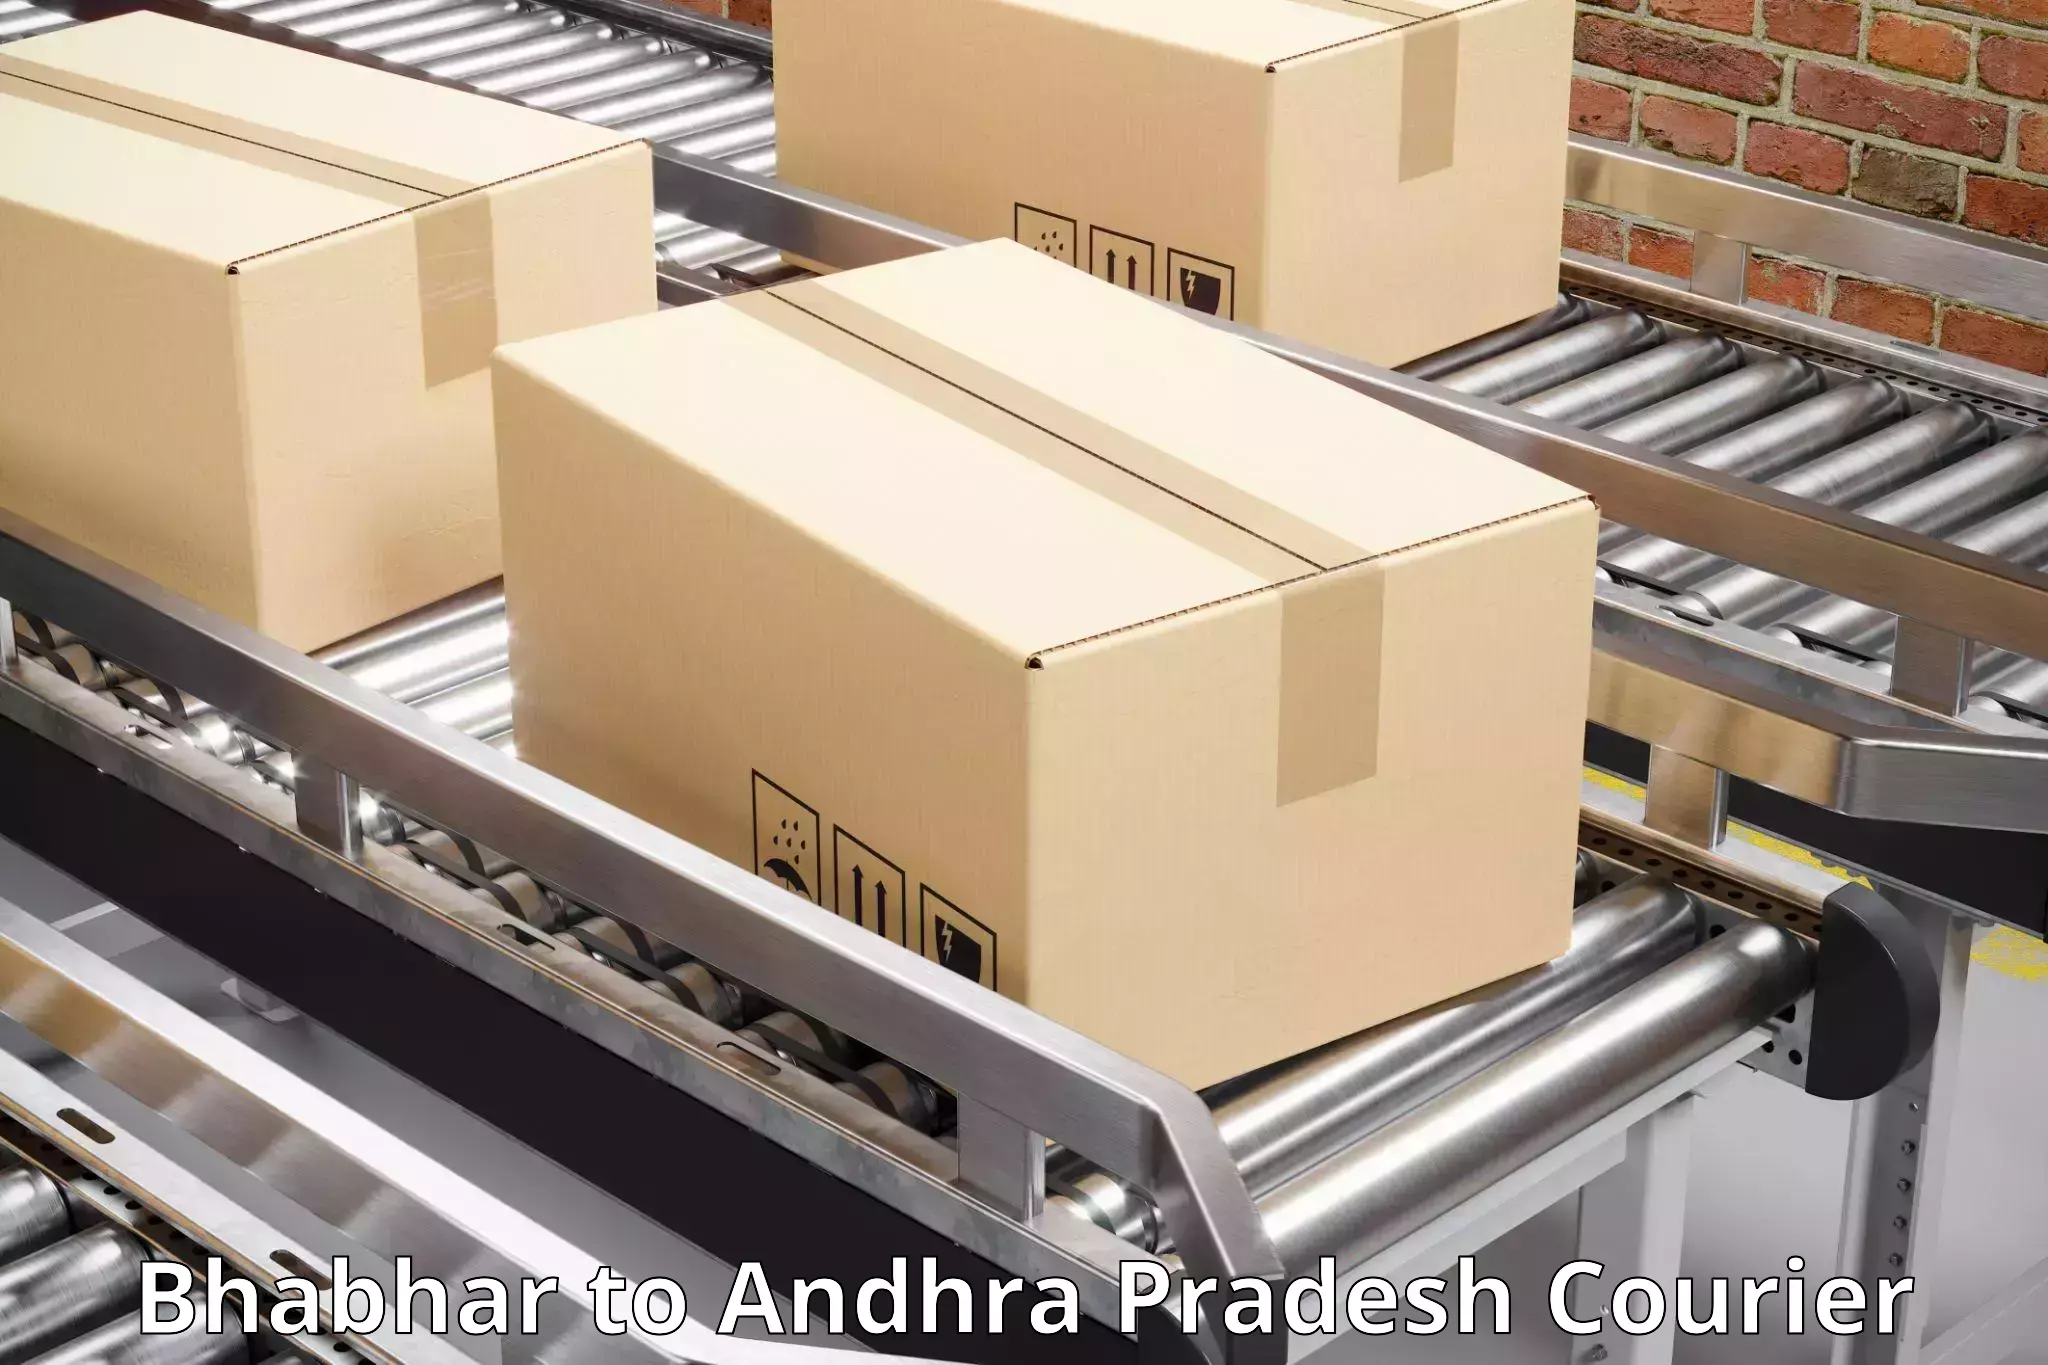 End-to-end delivery Bhabhar to Cuddapah